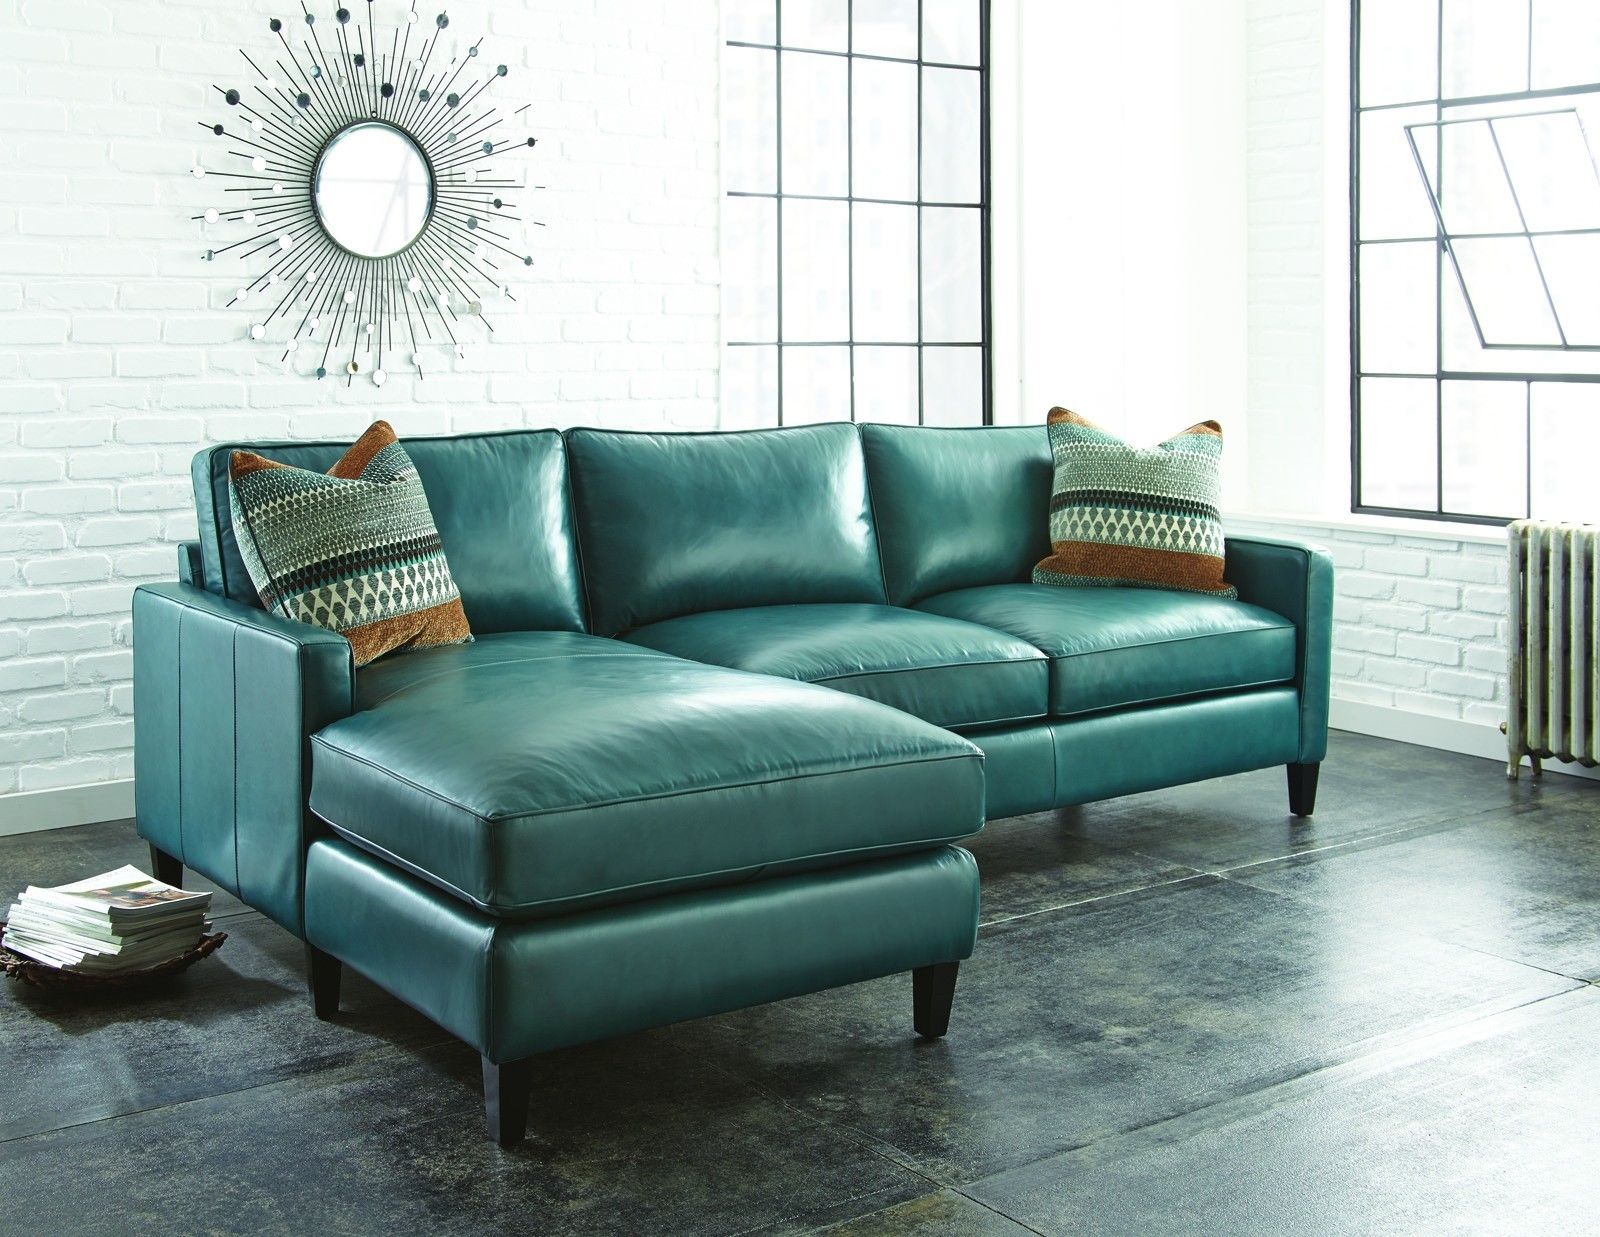 Furniture : All Leather Sofa And Loveseat Brown Leather Couch Covers Throughout Oakville Sectional Sofas (View 4 of 10)